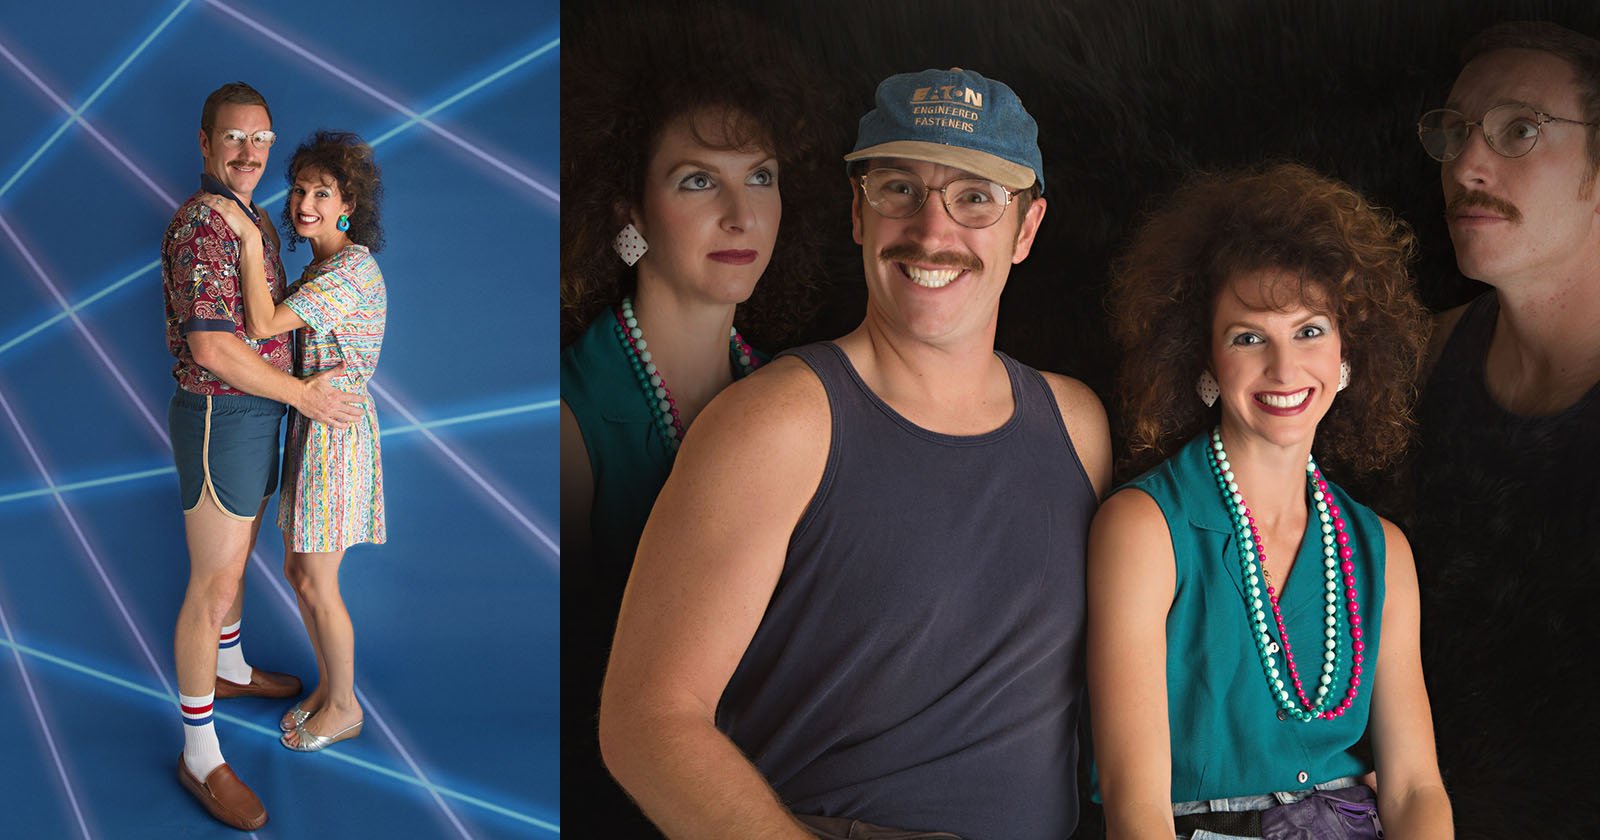 This Couple Did an '80s Themed Photo Shoot for Their 10th Anniversary